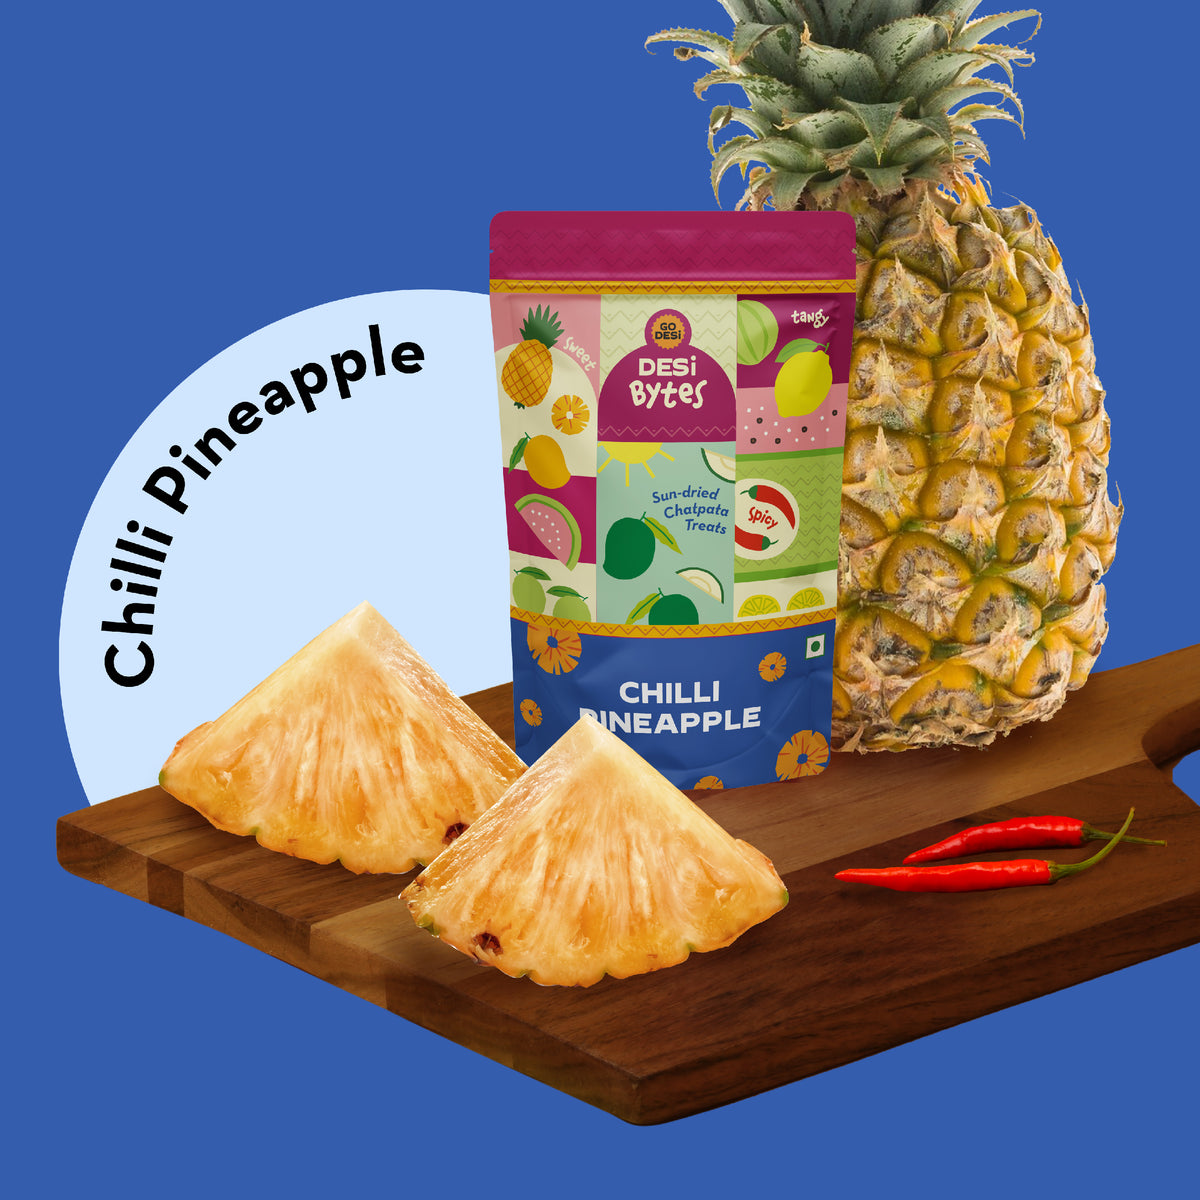 Chilli Pineapple Bytes | Sun-dried Pineapple Snack | 100% Natural | 150gms